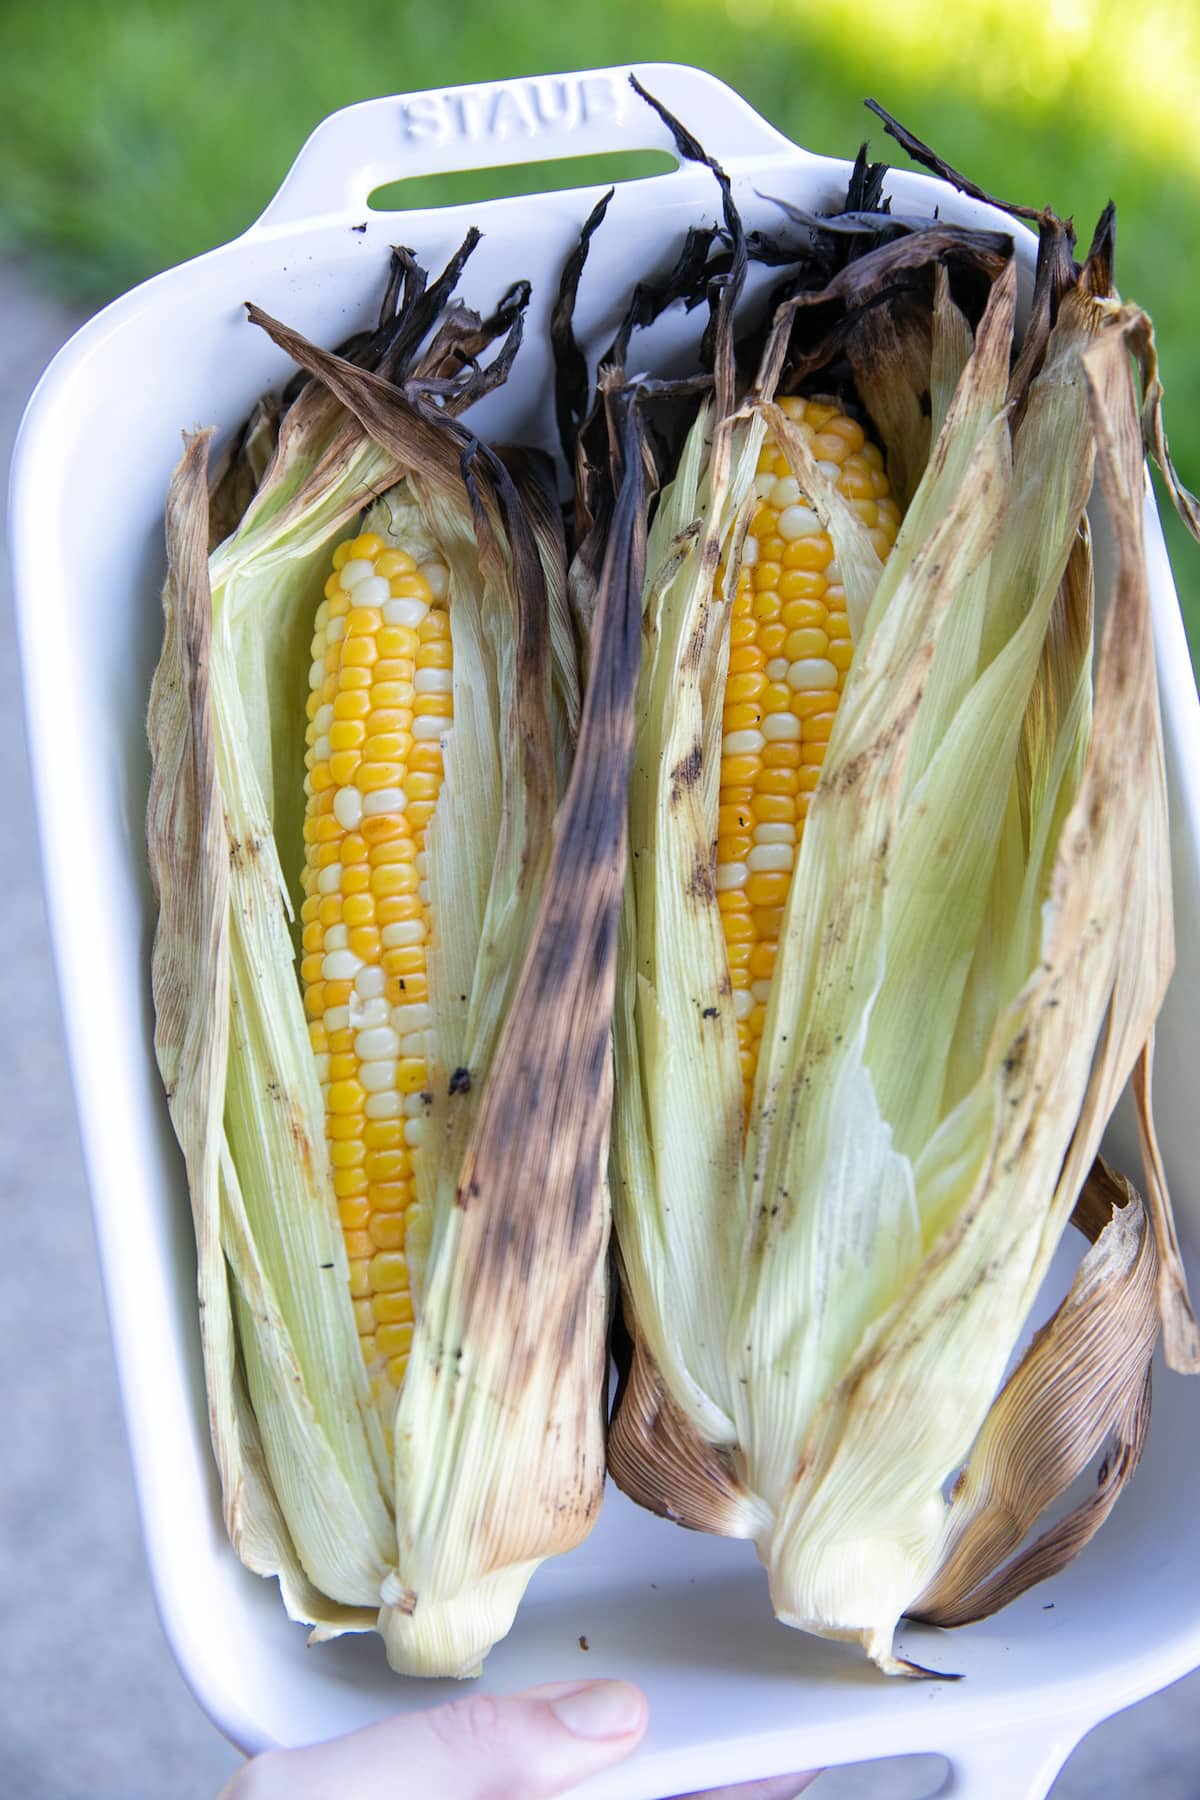 grilled corn in husks